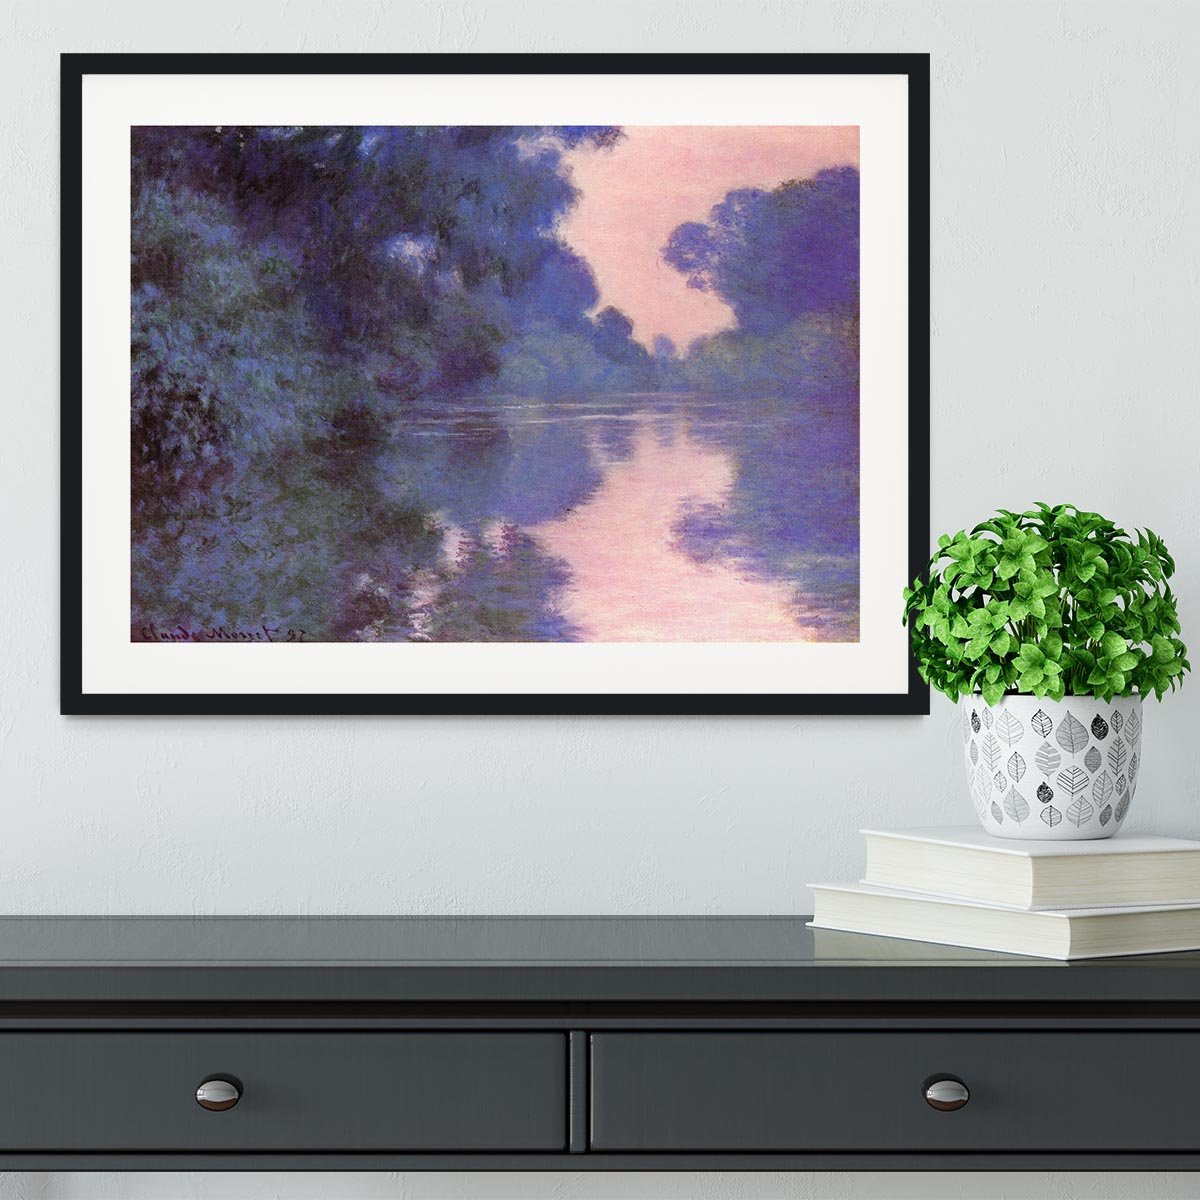 Seine arm at Giverny by Monet Framed Print - Canvas Art Rocks - 1